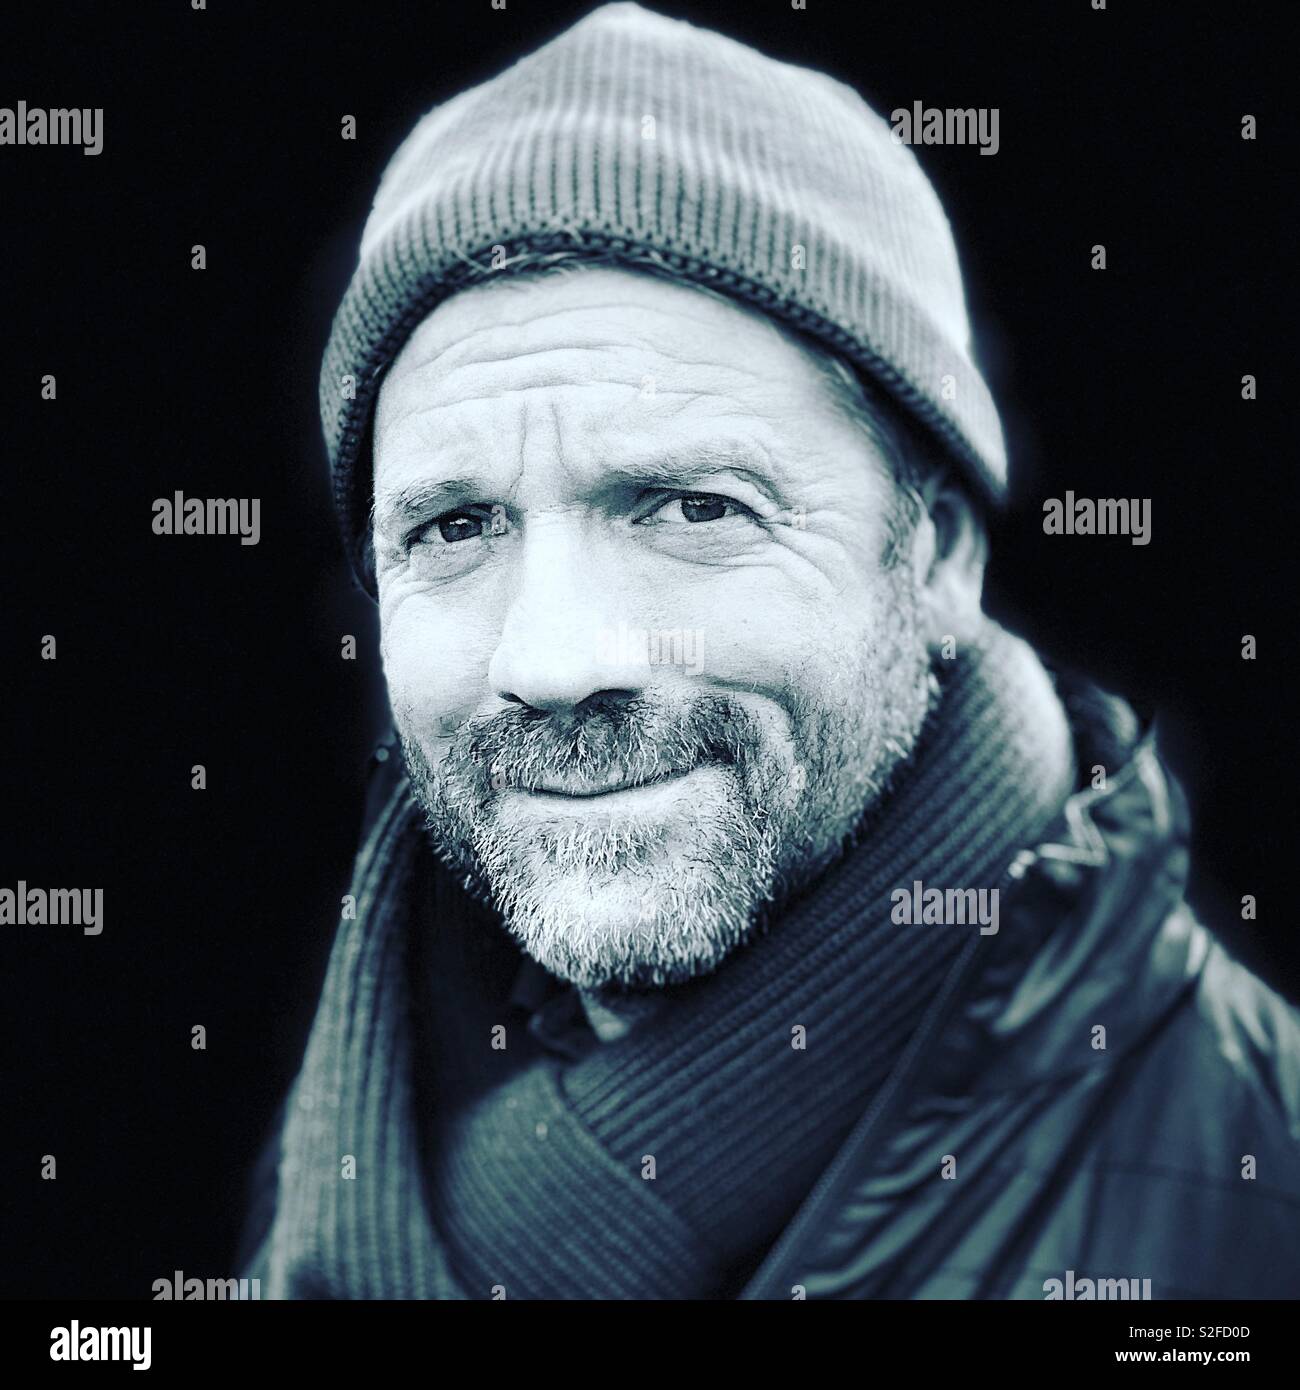 Head and shoulders portrait in monochrome of a middle aged man in a beanie hat wearing a hat and scarf. Stock Photo